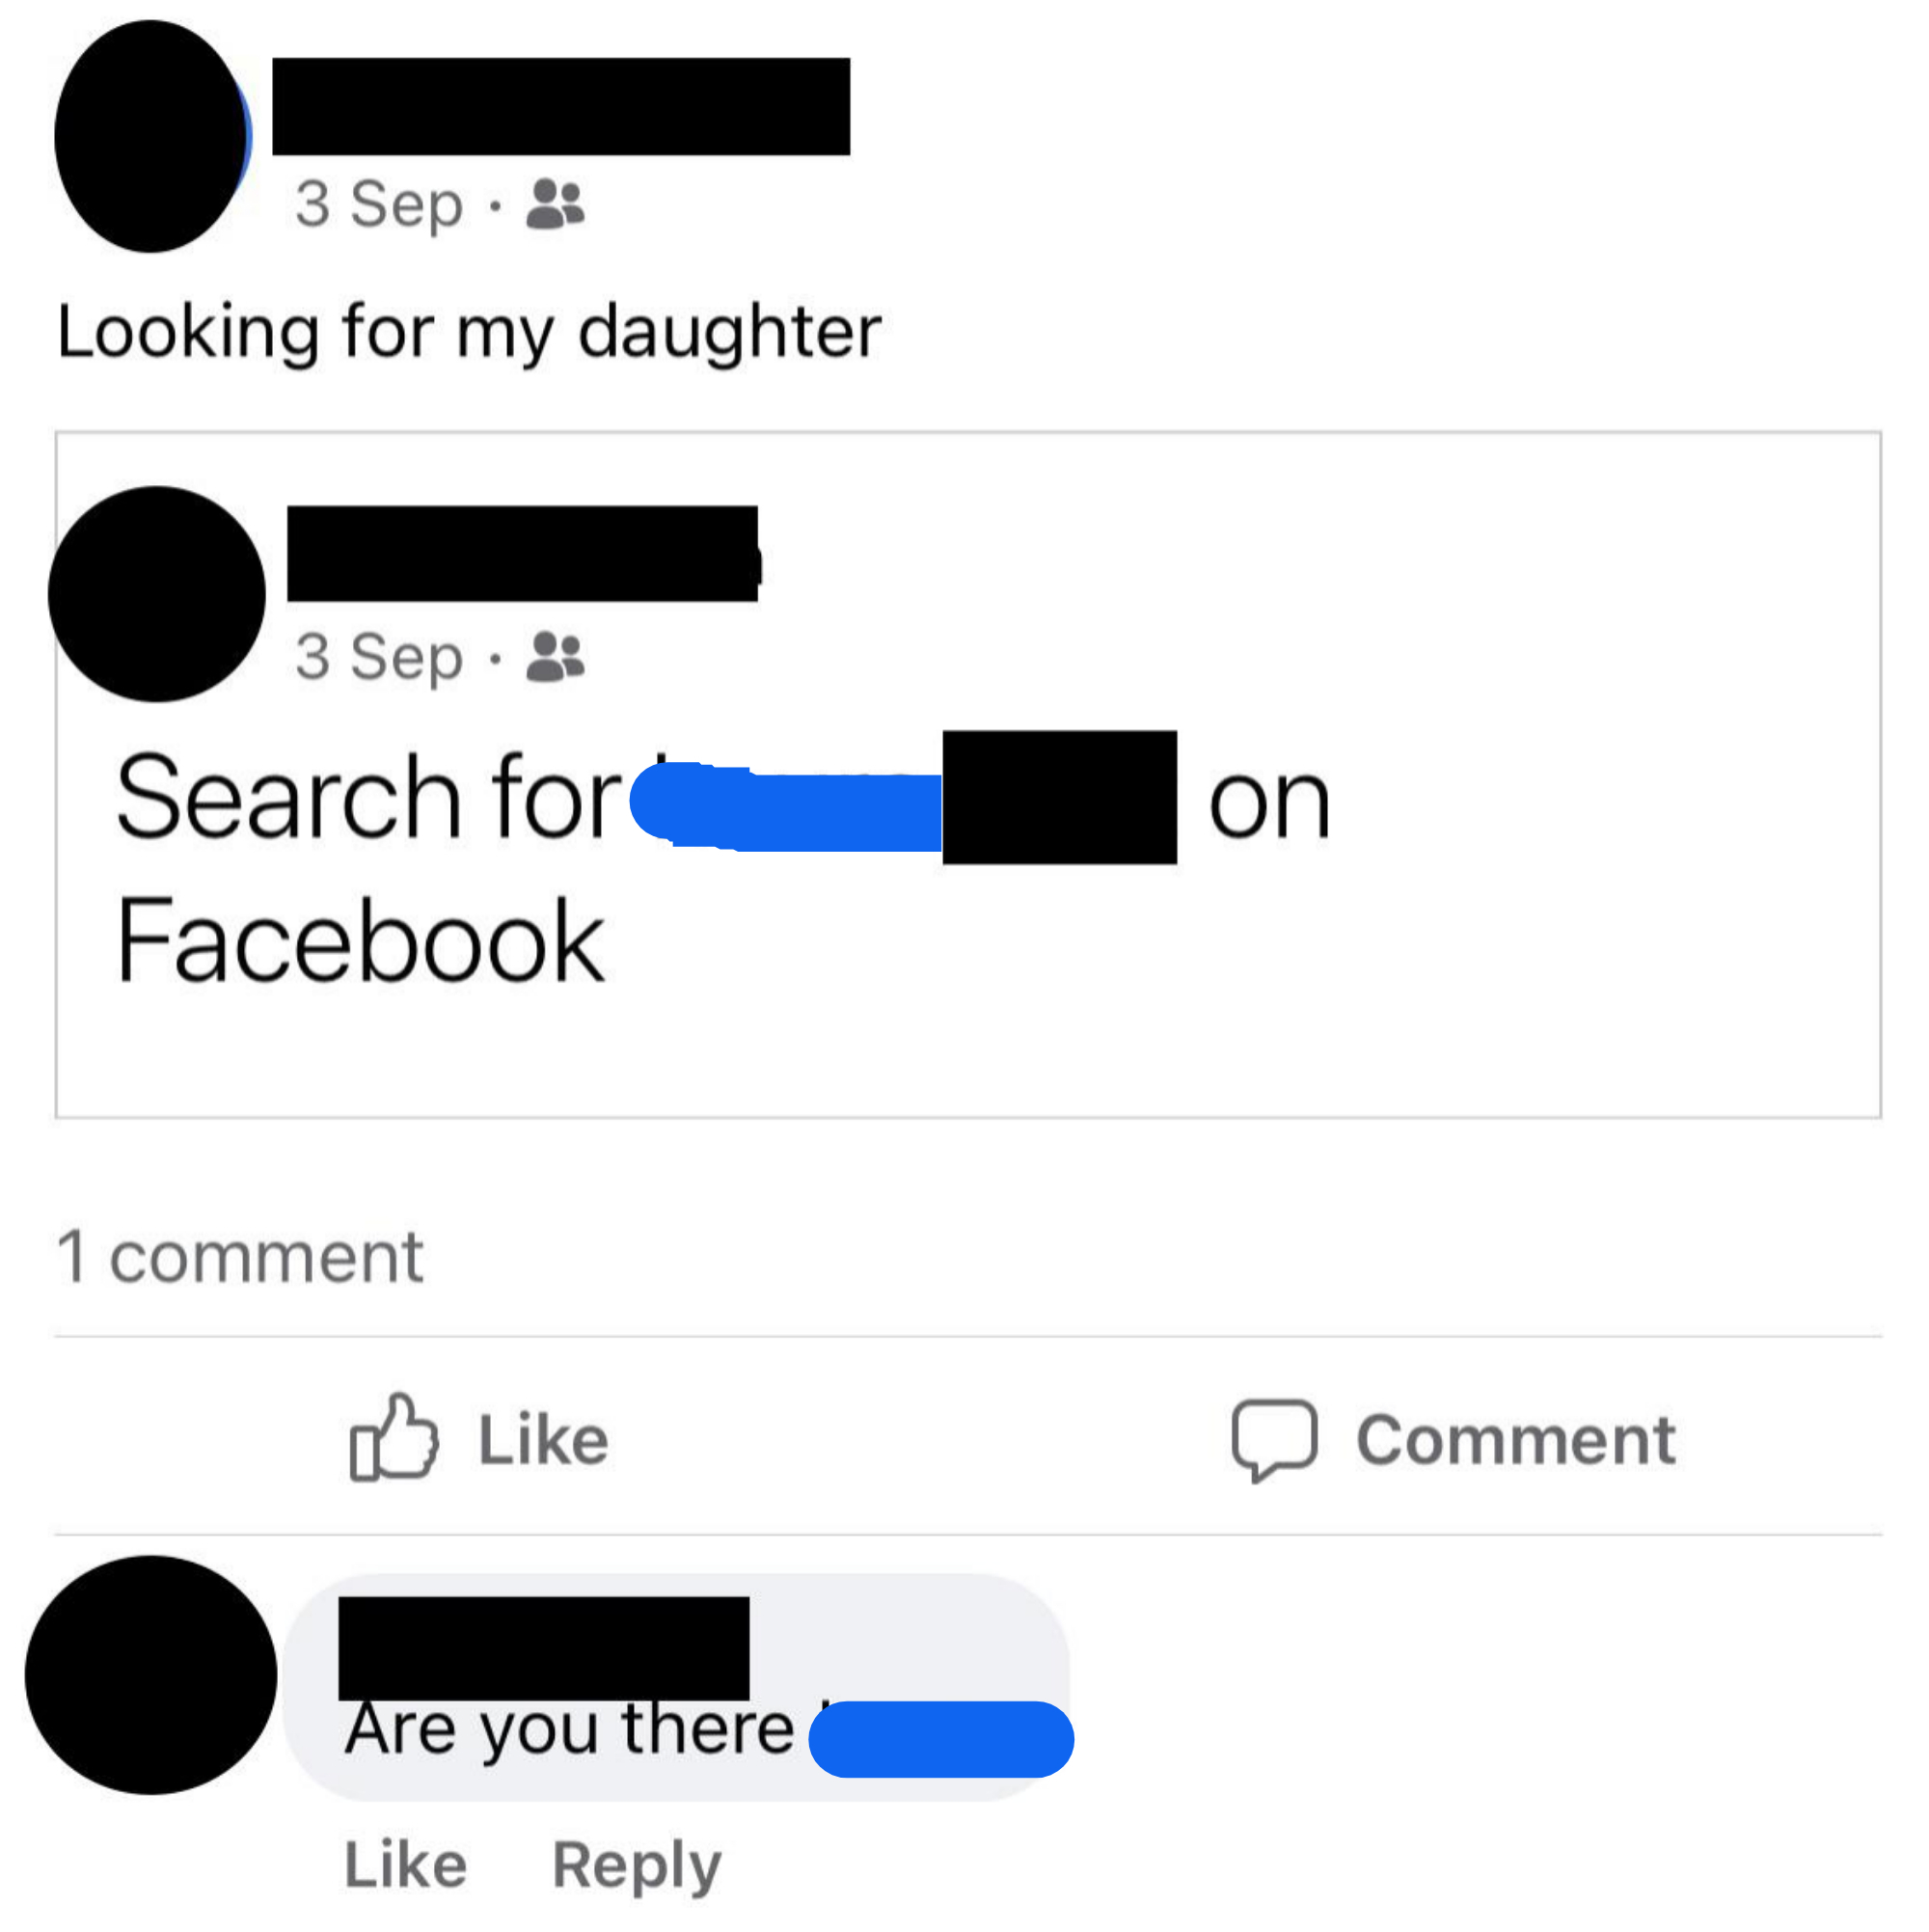 &quot;Looking for my daughter&quot;